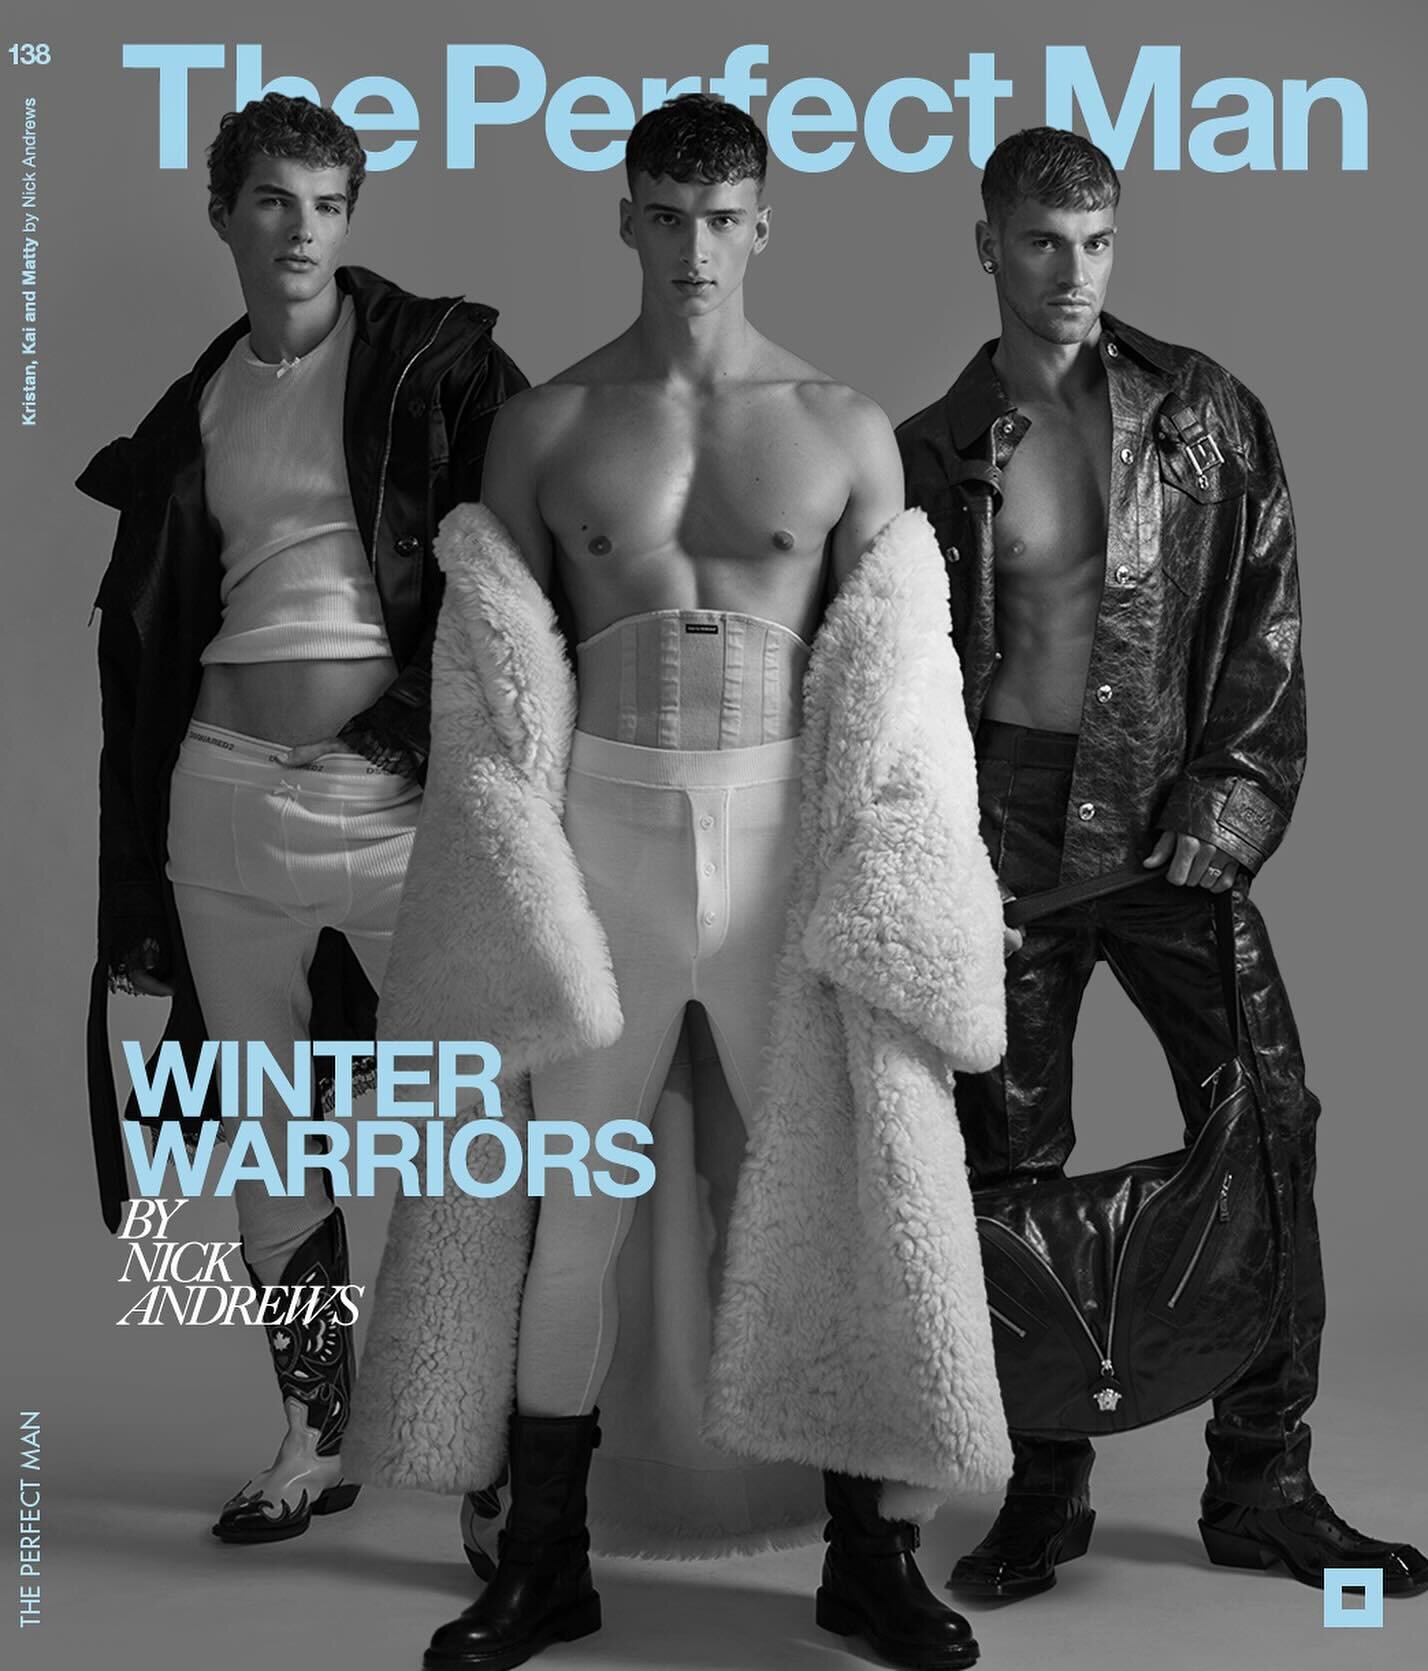 Winter Warriors &lsquo;23: A Winter Fashion Special by Craig Andrew James featuring Kai, Kristan, Matty, and Matheus in a selection from the winter collections.

Complete editorial link in bio.

Photography @nickandrewsphoto
Fashion + Casting @craiga